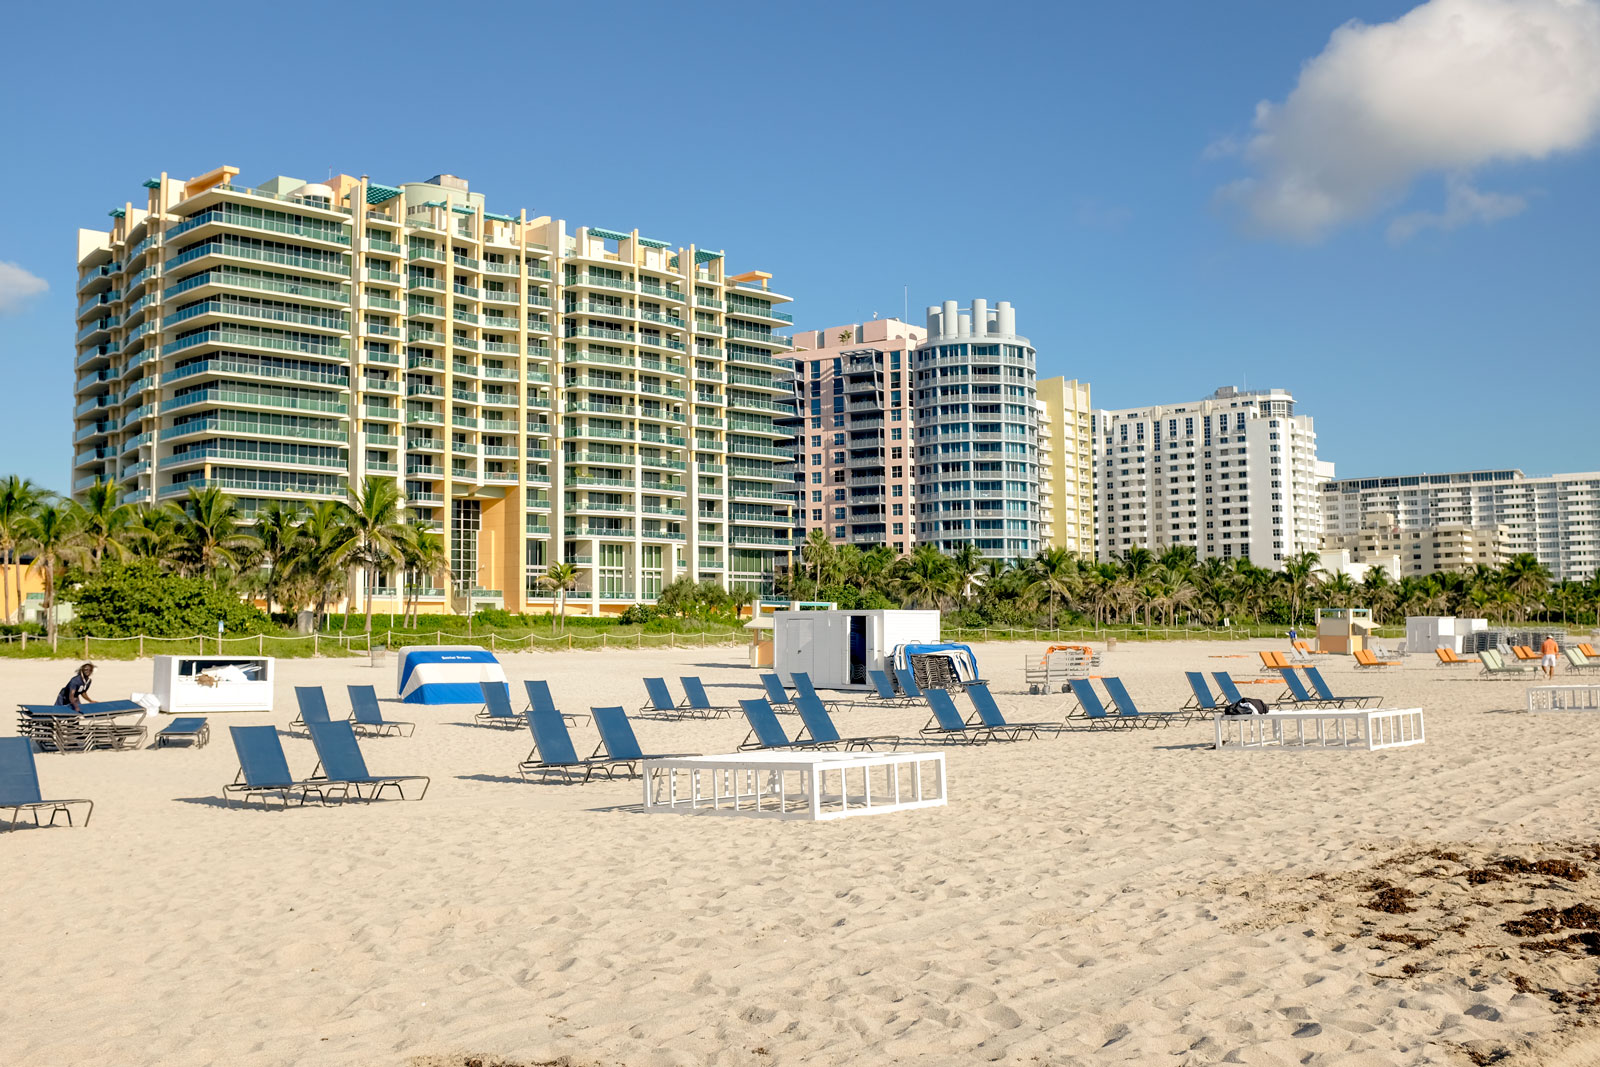 Chairs being set out for the day in Miami Beach